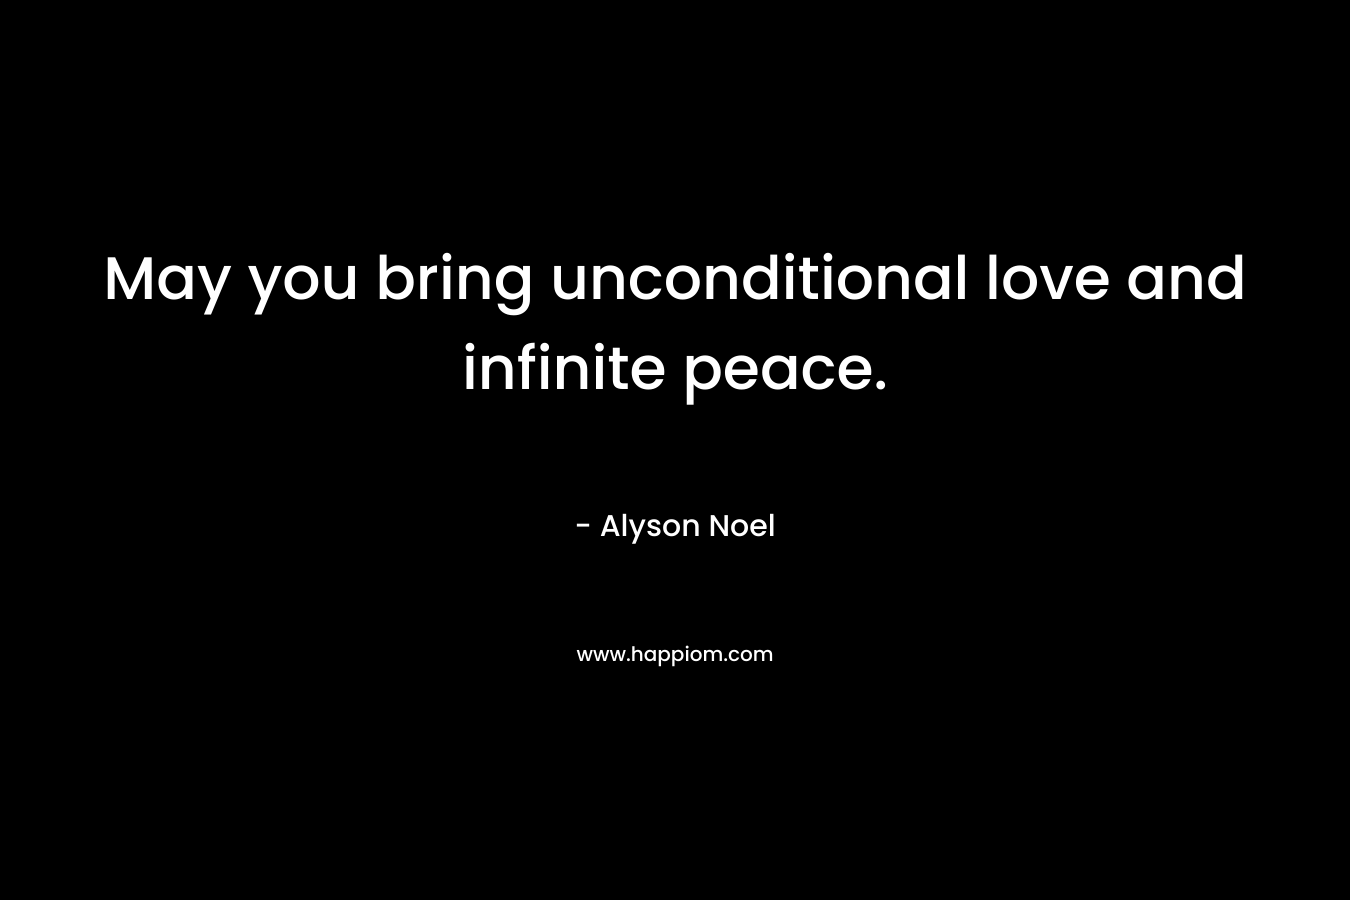 May you bring unconditional love and infinite peace. – Alyson Noel